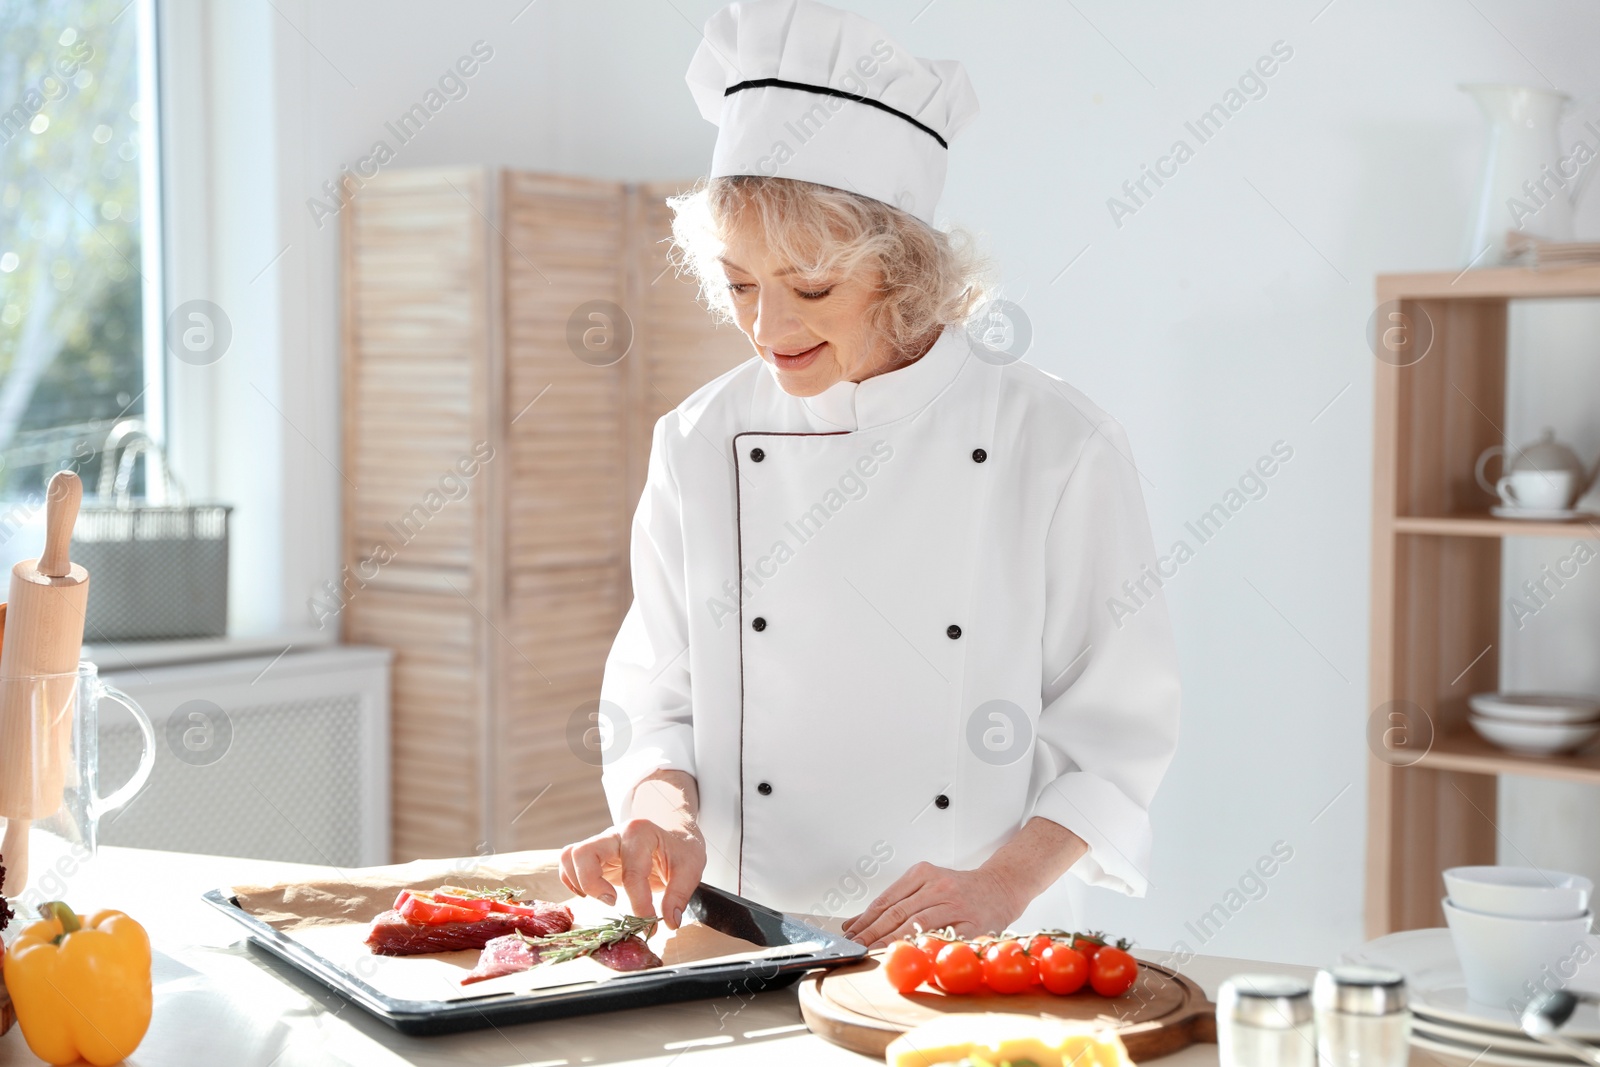 Photo of Professional female chef preparing meat in kitchen